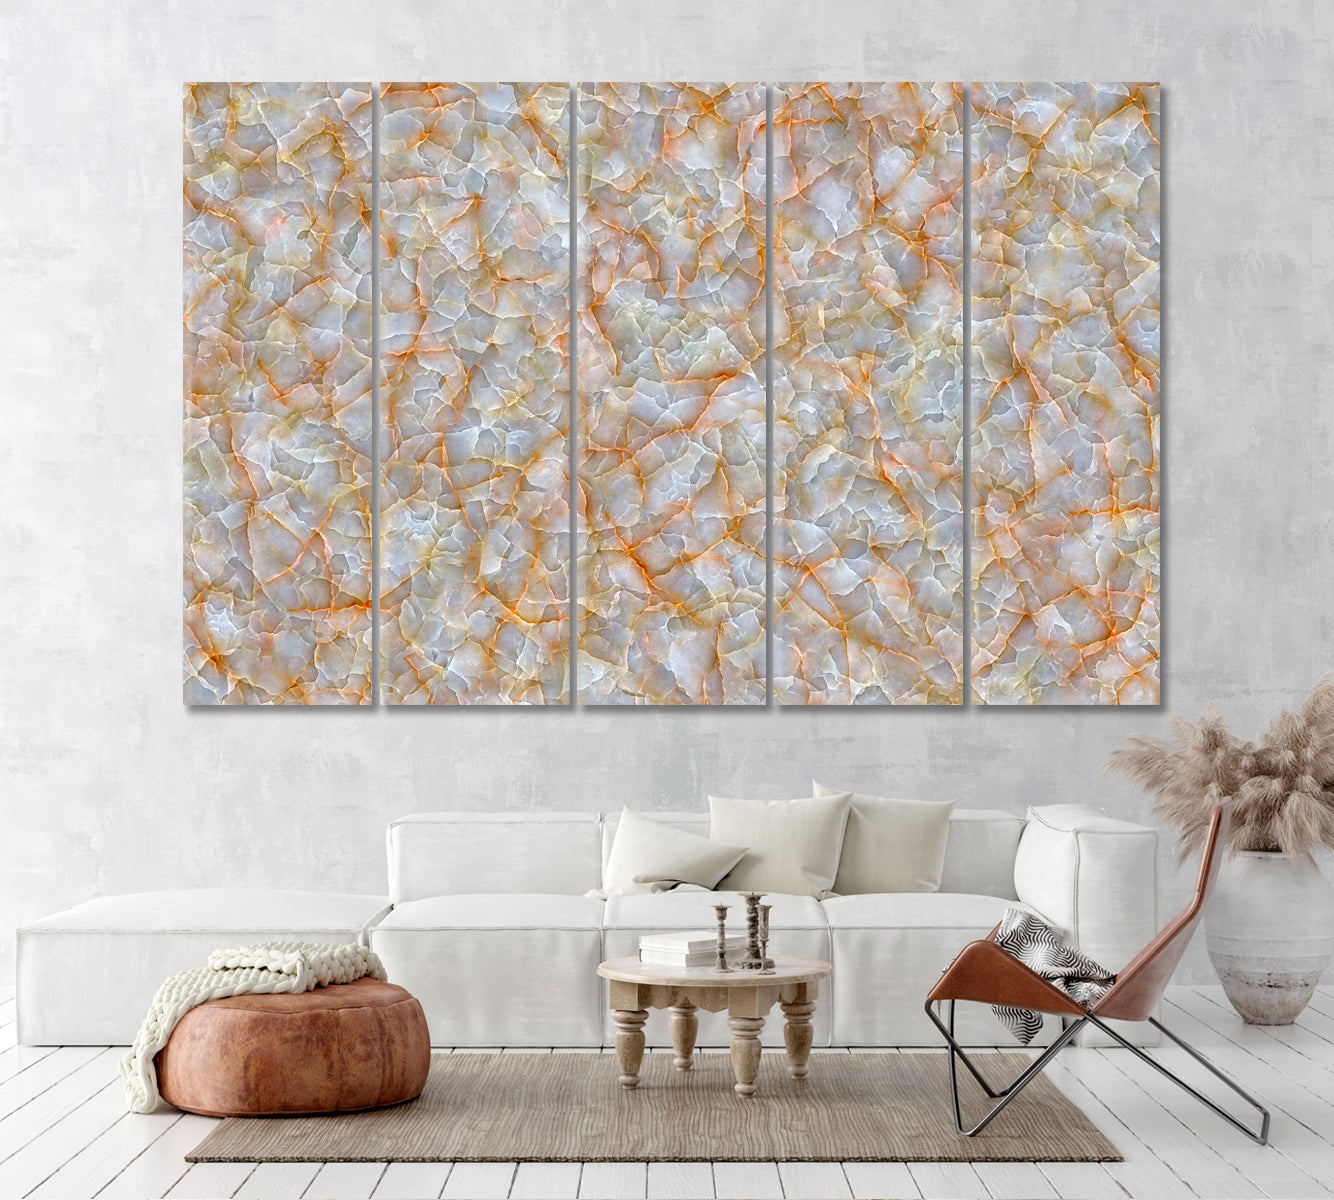 Cracked Marble Pattern Canvas Print ArtLexy 5 Panels 36"x24" inches 